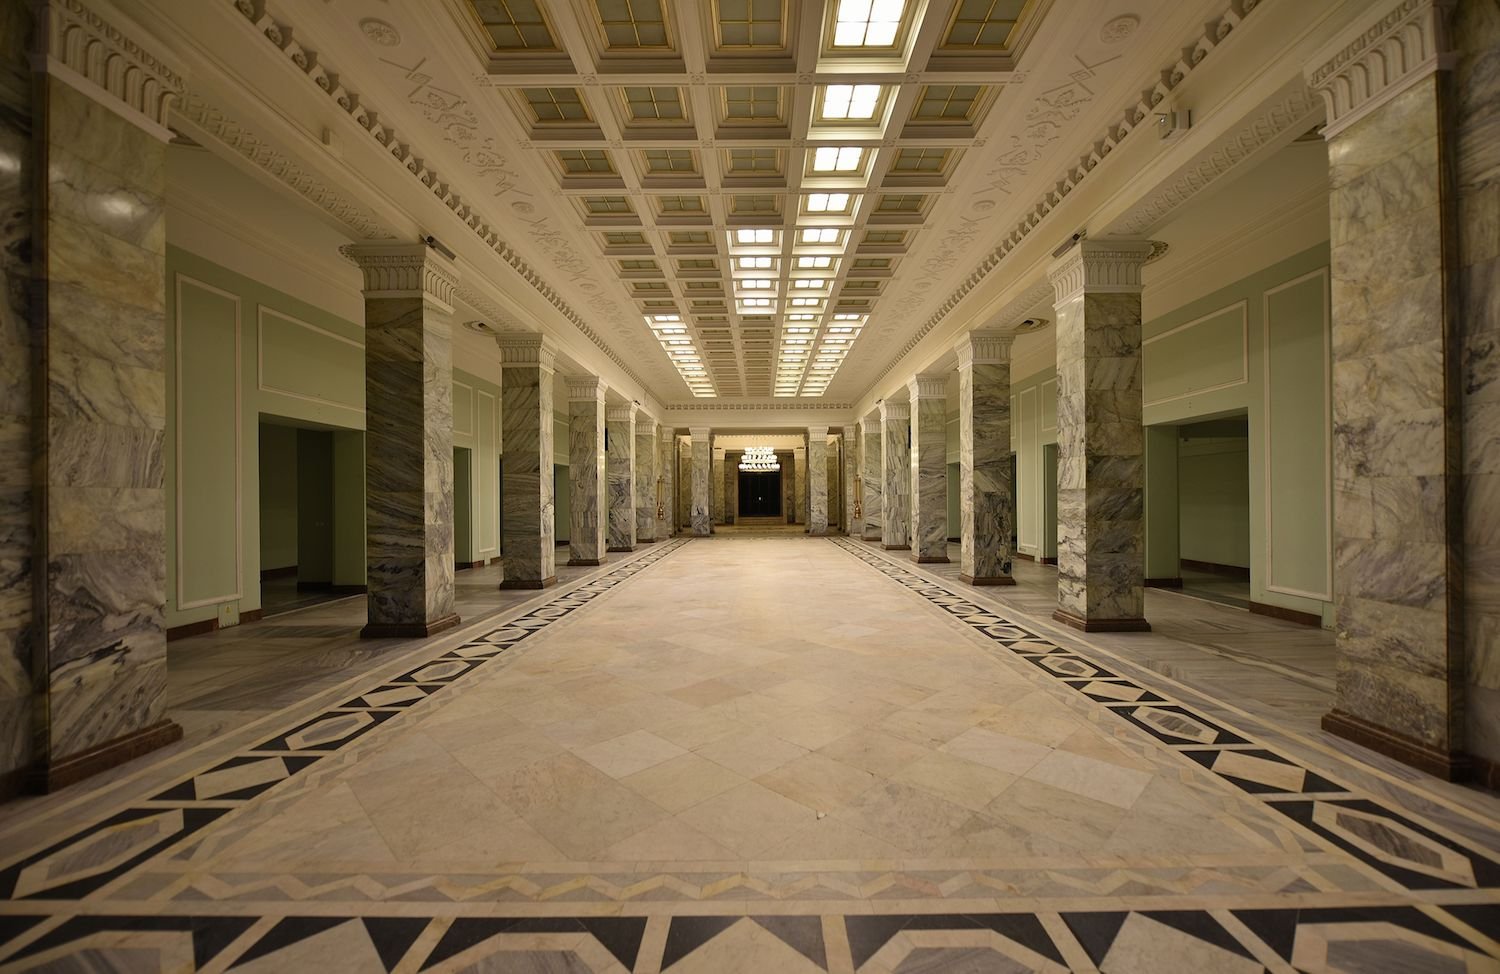 The Marble Hall. Image: Adrian Grycuk under a CC licence